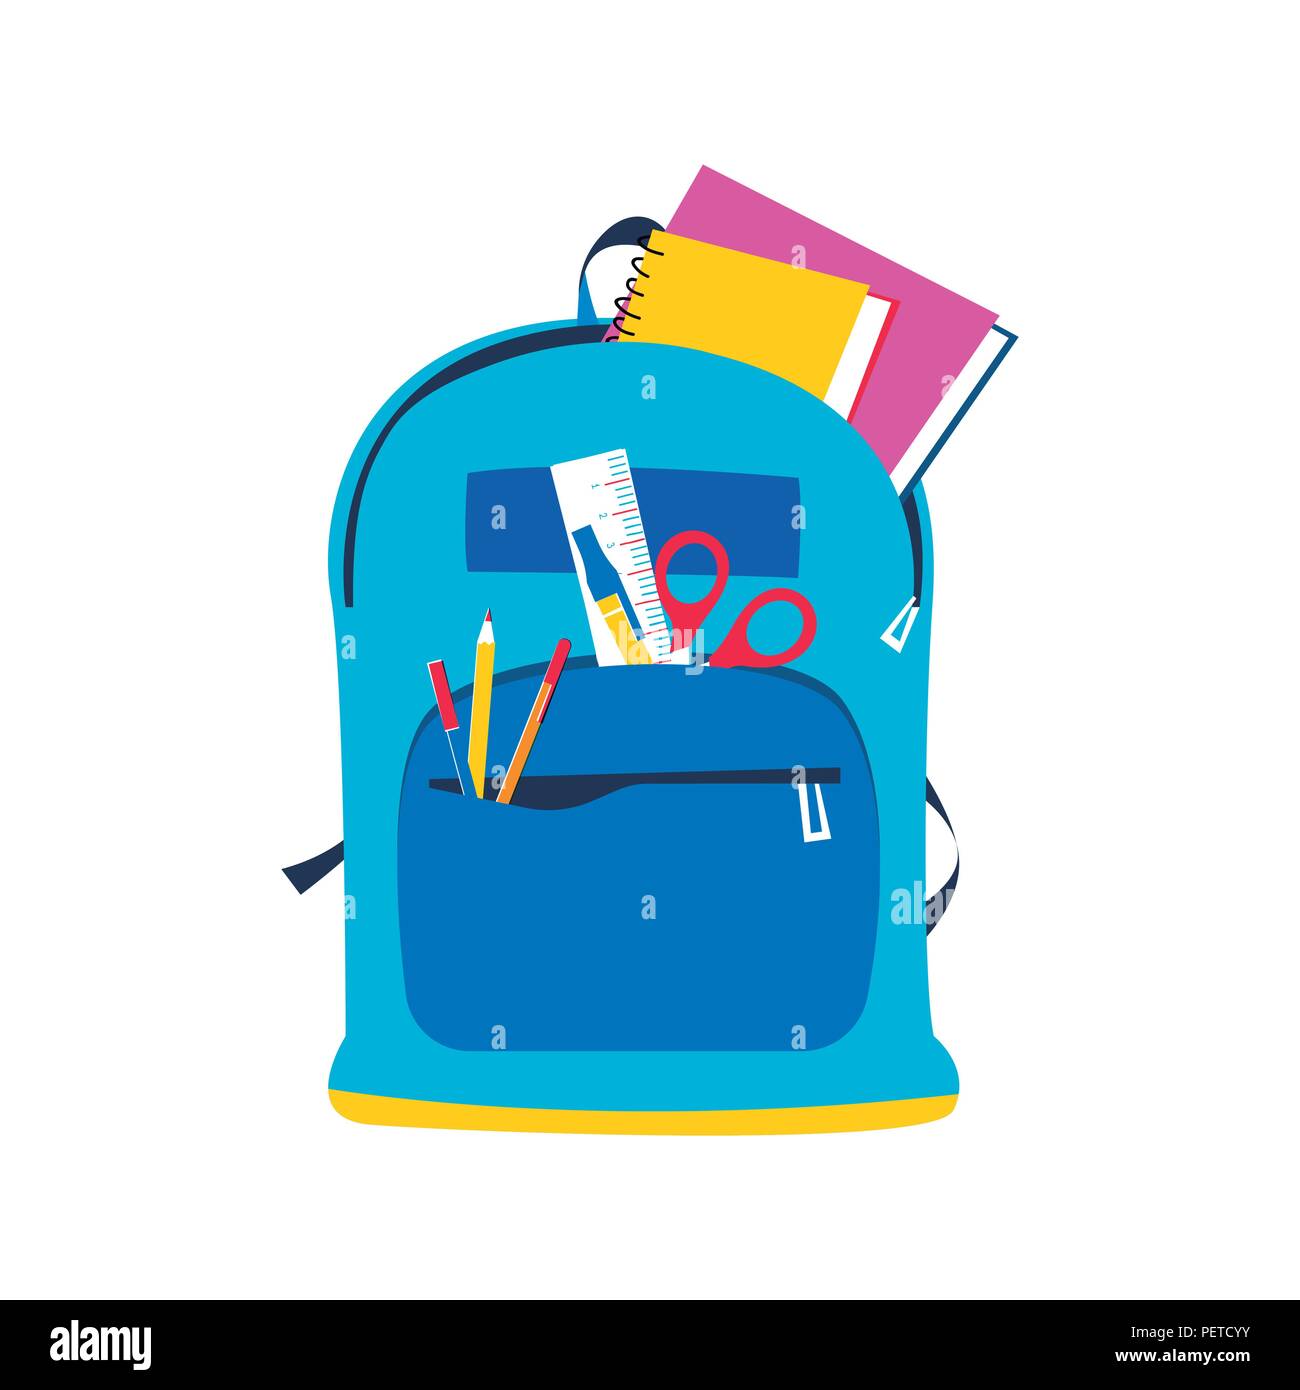 https://c8.alamy.com/comp/PETCYY/kid-backpack-isolated-illustration-student-bag-with-art-supplies-pencil-scissors-ruler-and-note-book-for-back-to-school-concept-eps10-vector-PETCYY.jpg